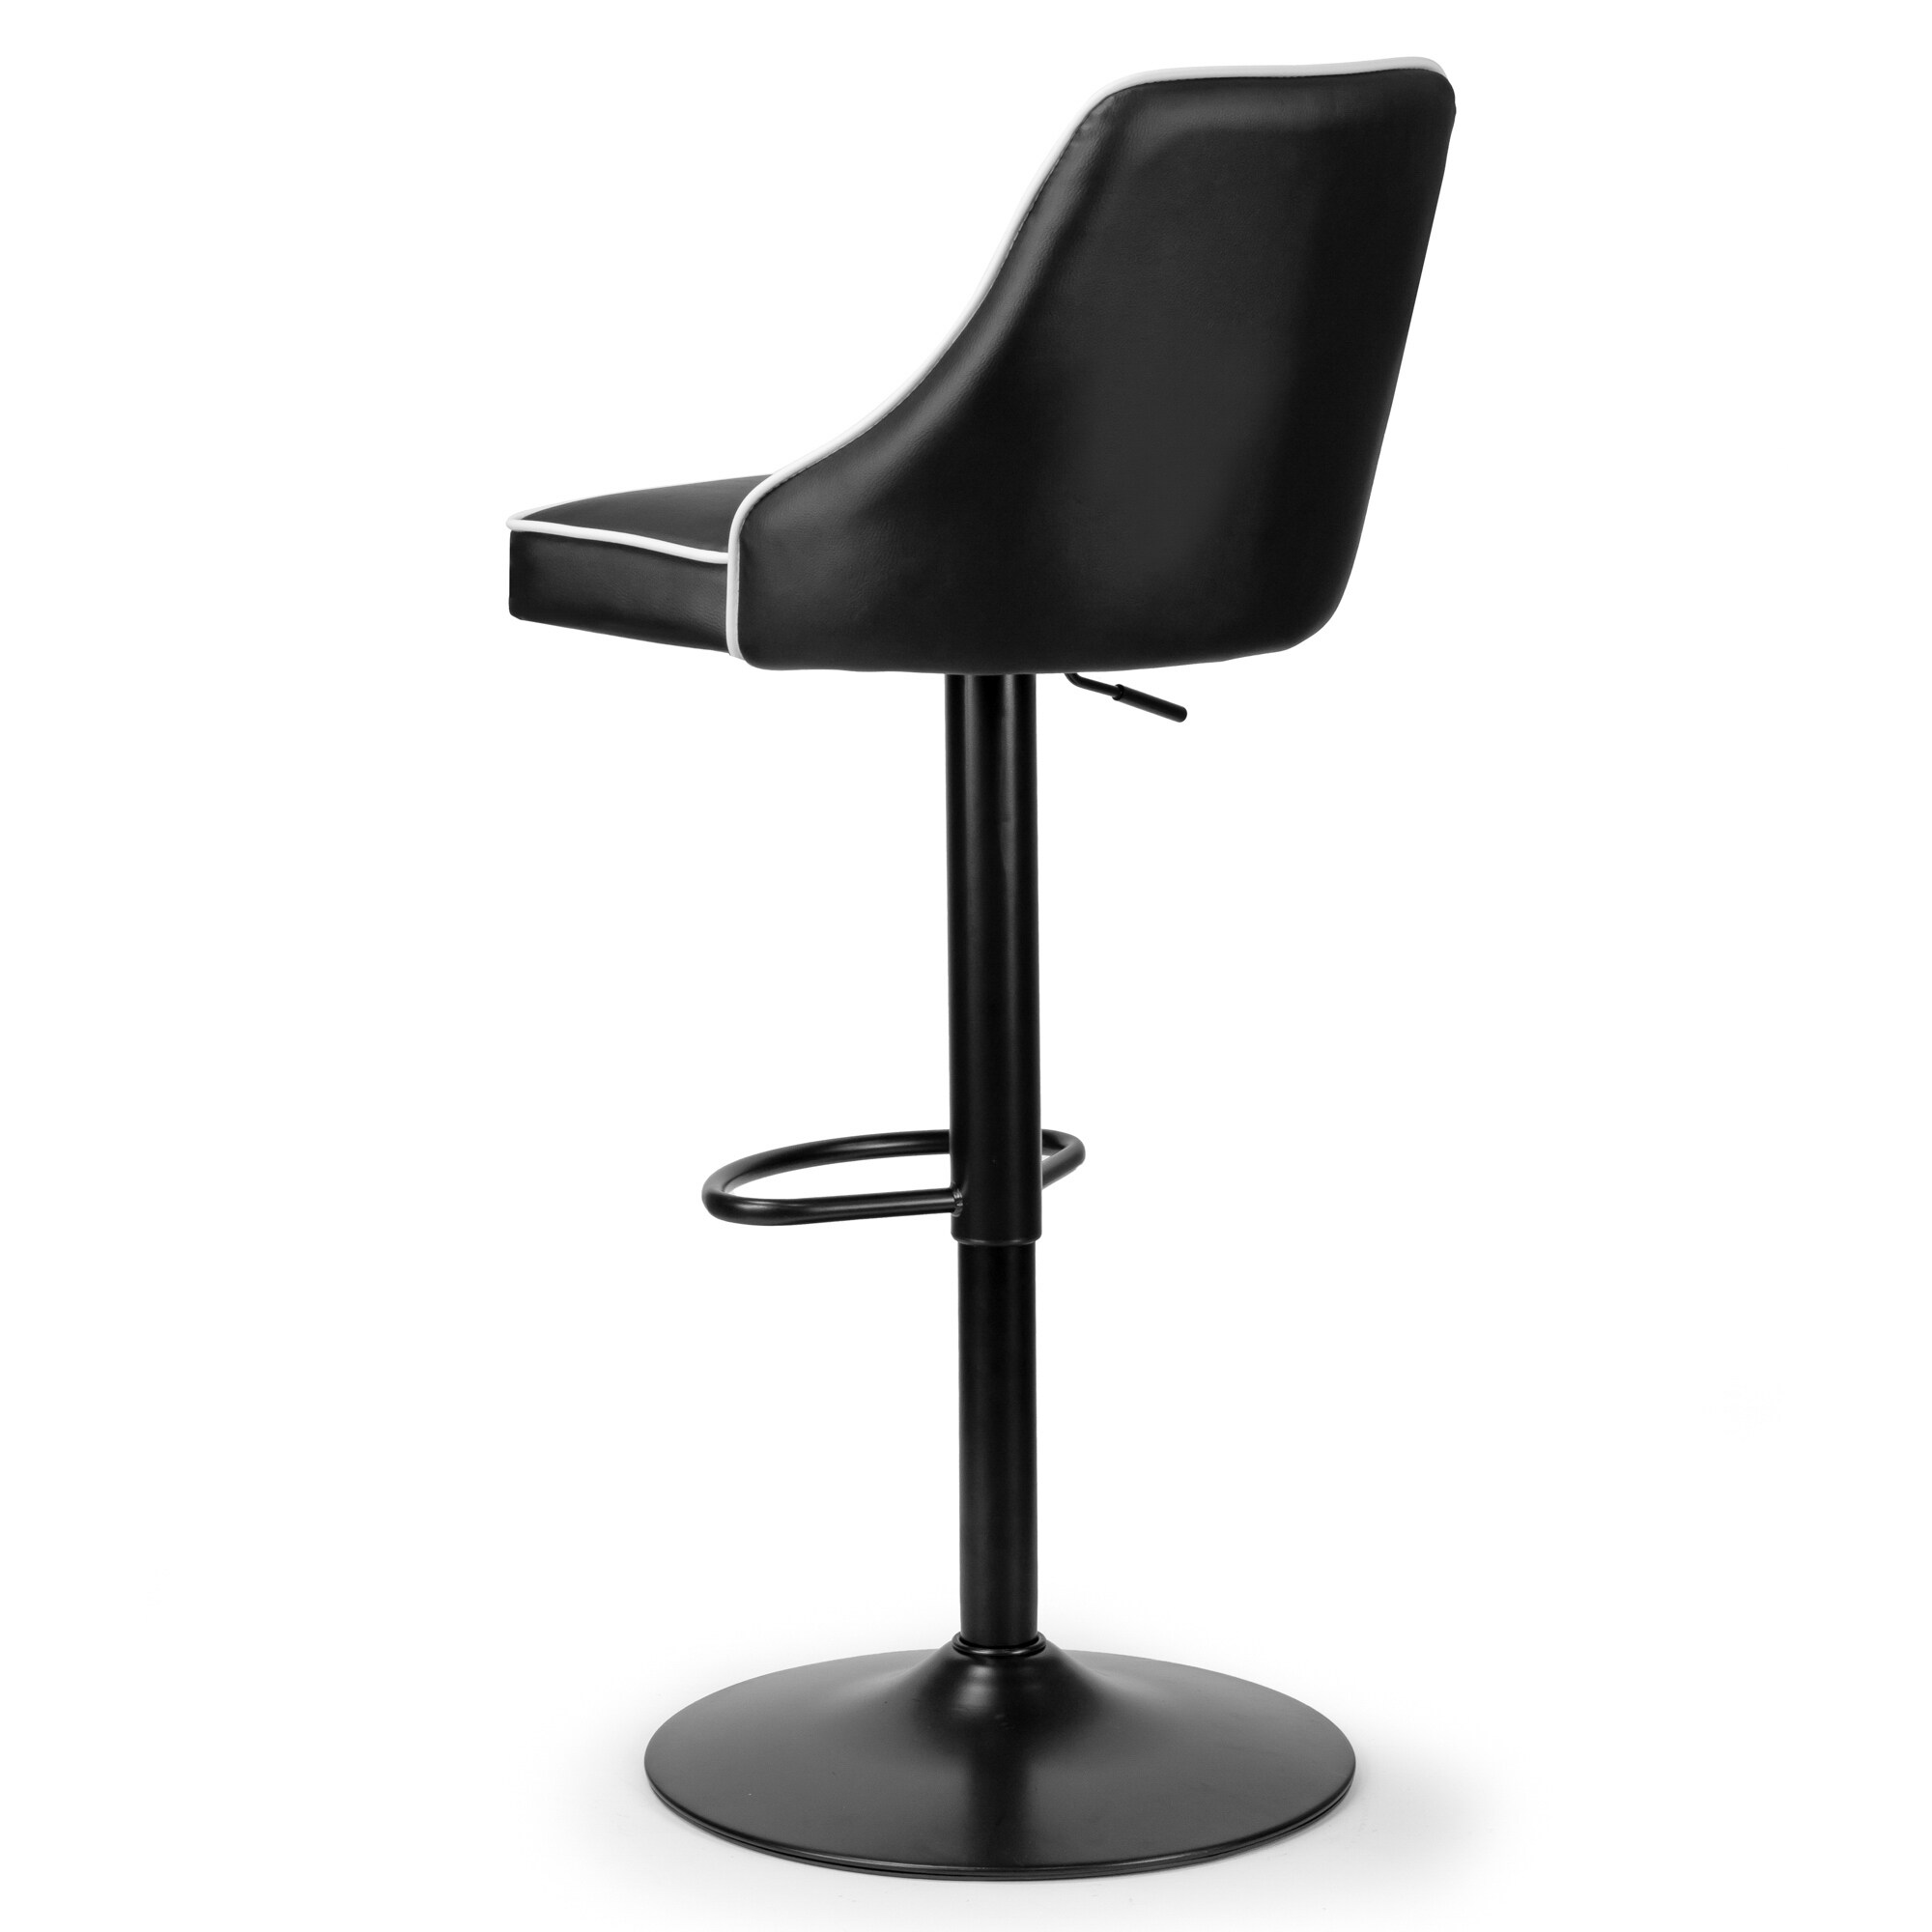 https://ak1.ostkcdn.com/images/products/22122417/Set-of-2-Alston-Black-Adjustable-Height-Swivel-Bar-Stool-with-White-Piping-4064d1cf-3264-4839-8435-06ef7ba2dac8.jpg